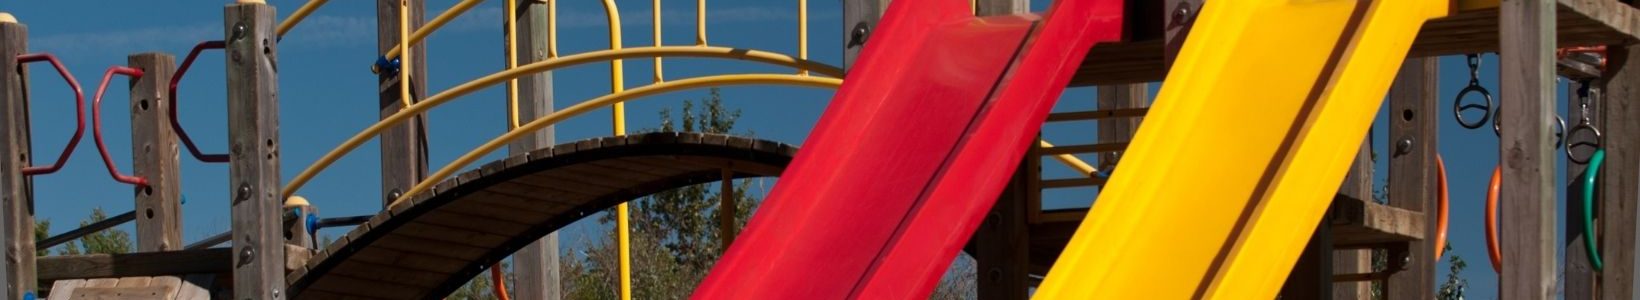 A small playground with two slides side by side.